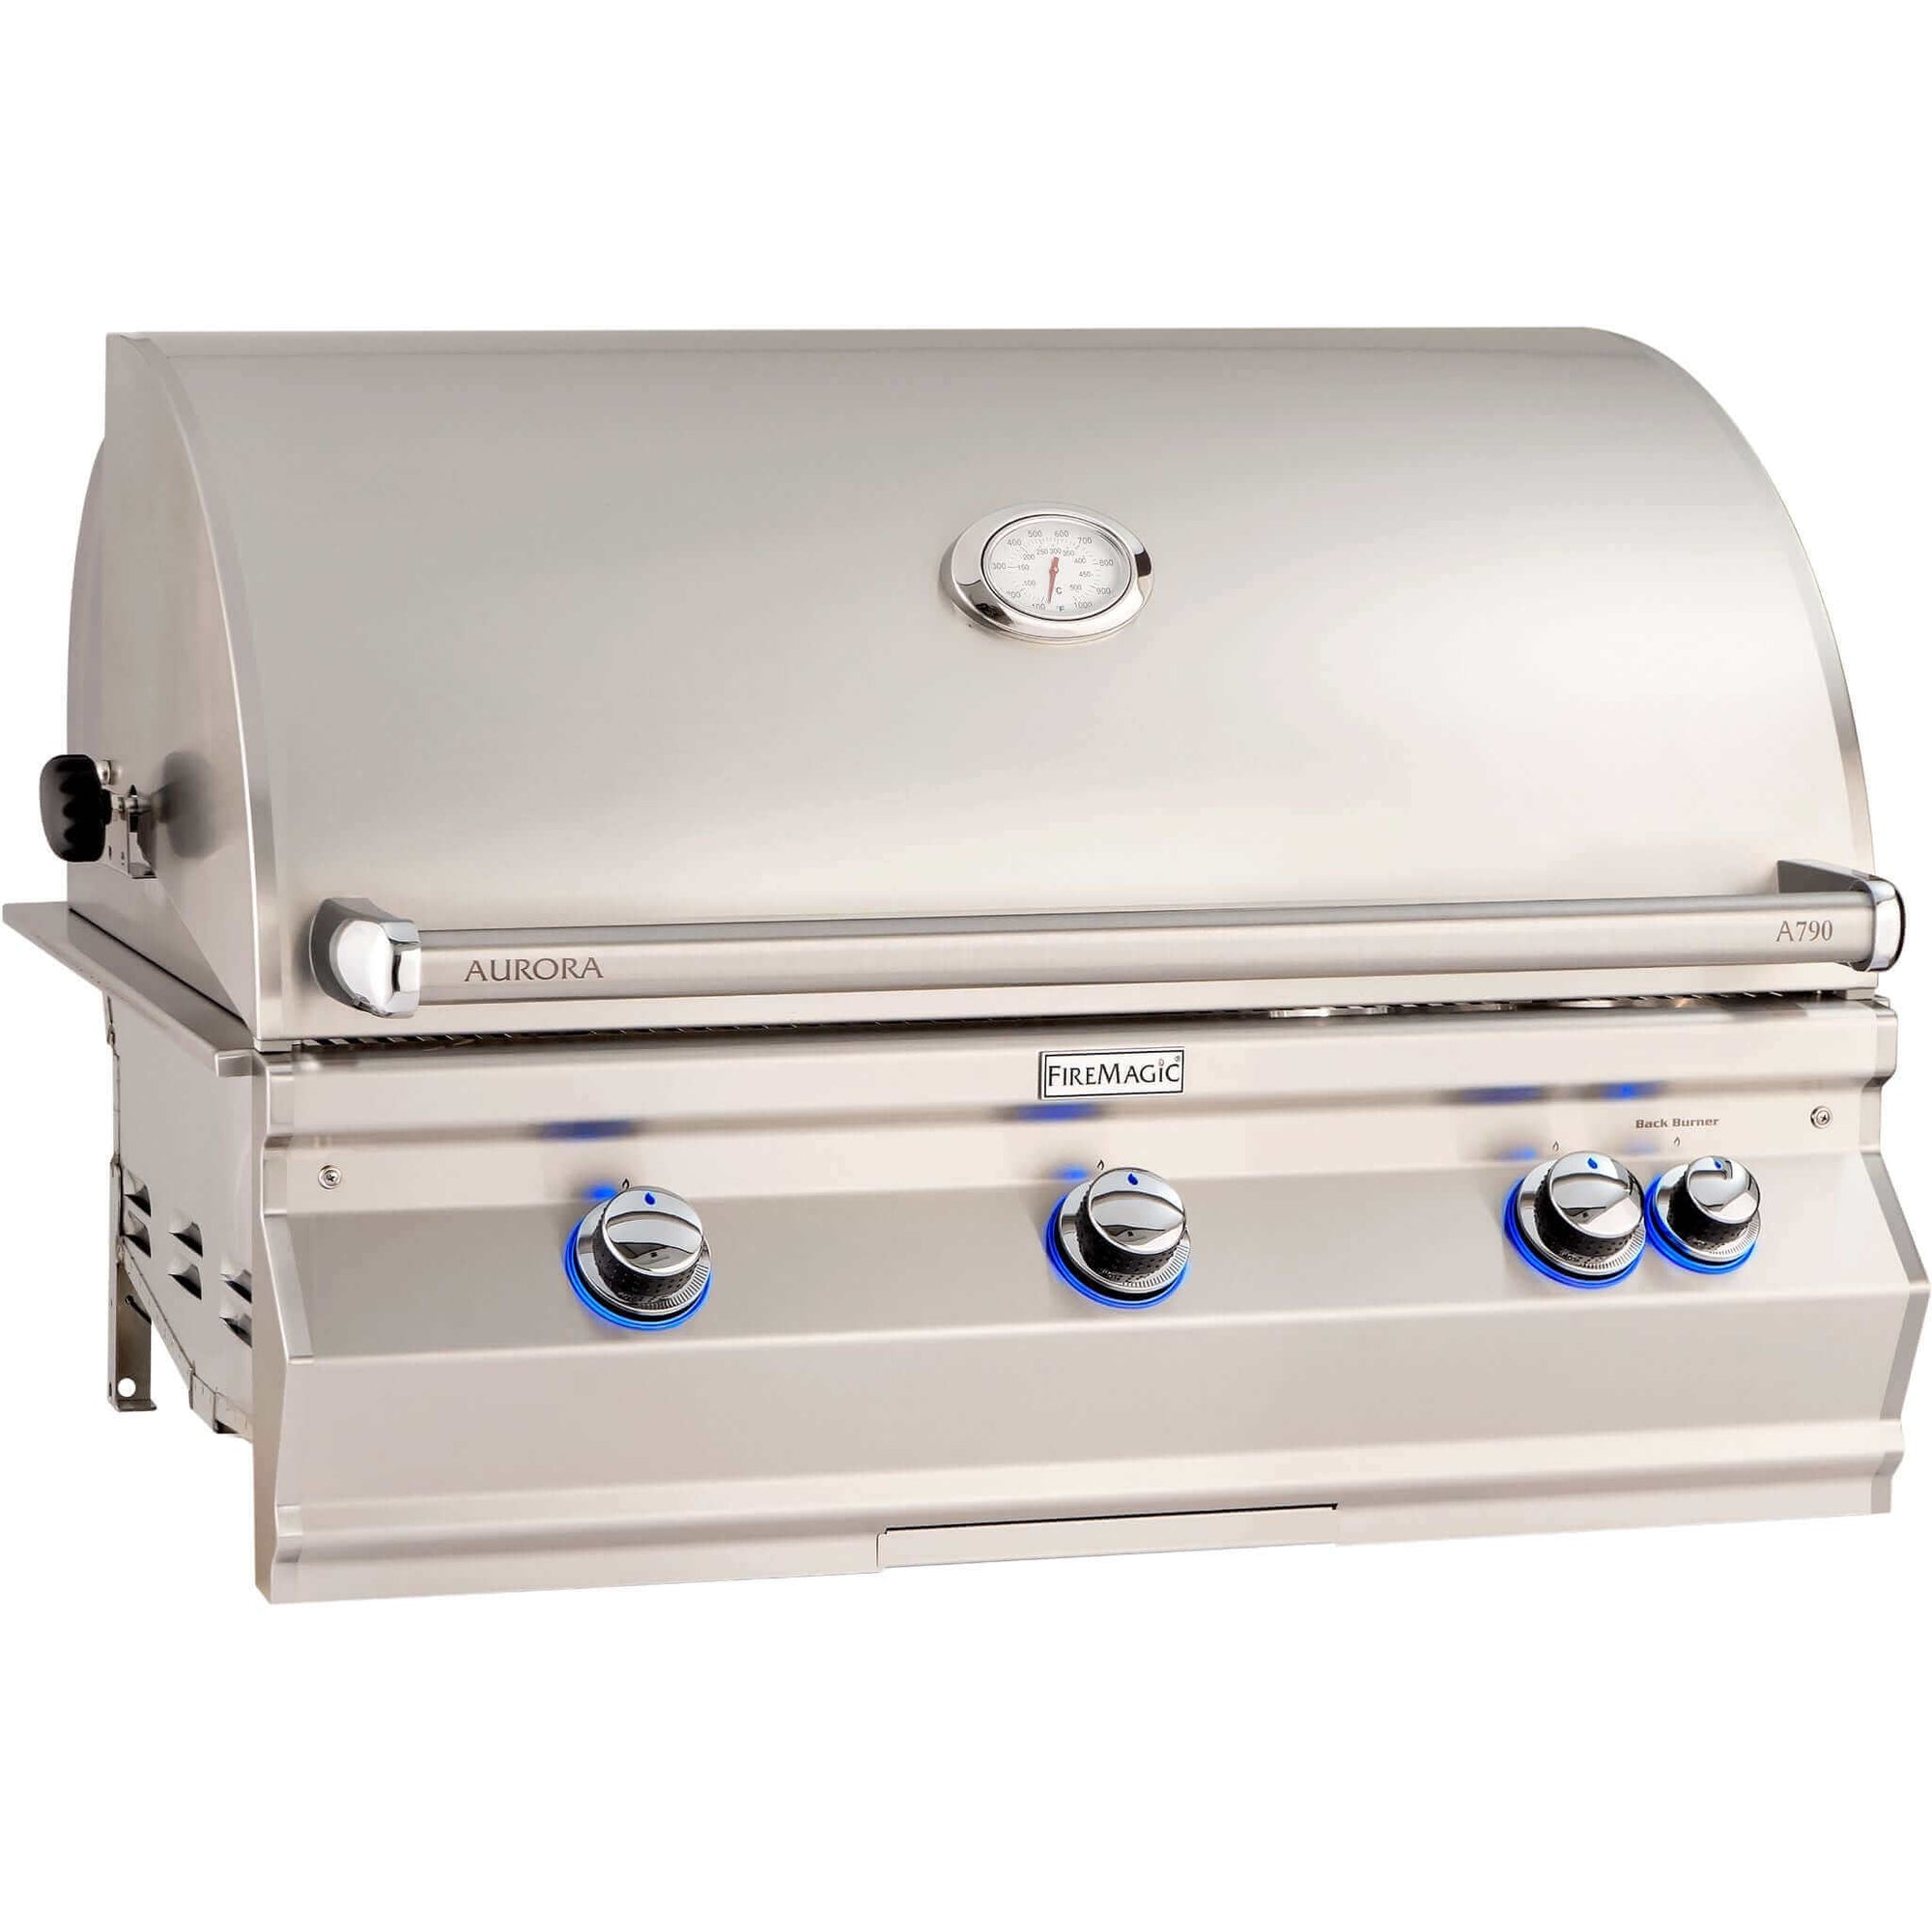 Fire Magic Aurora A790I 36" Built-In Grill with Analog Thermometer & Rotisserie-Natural Gas